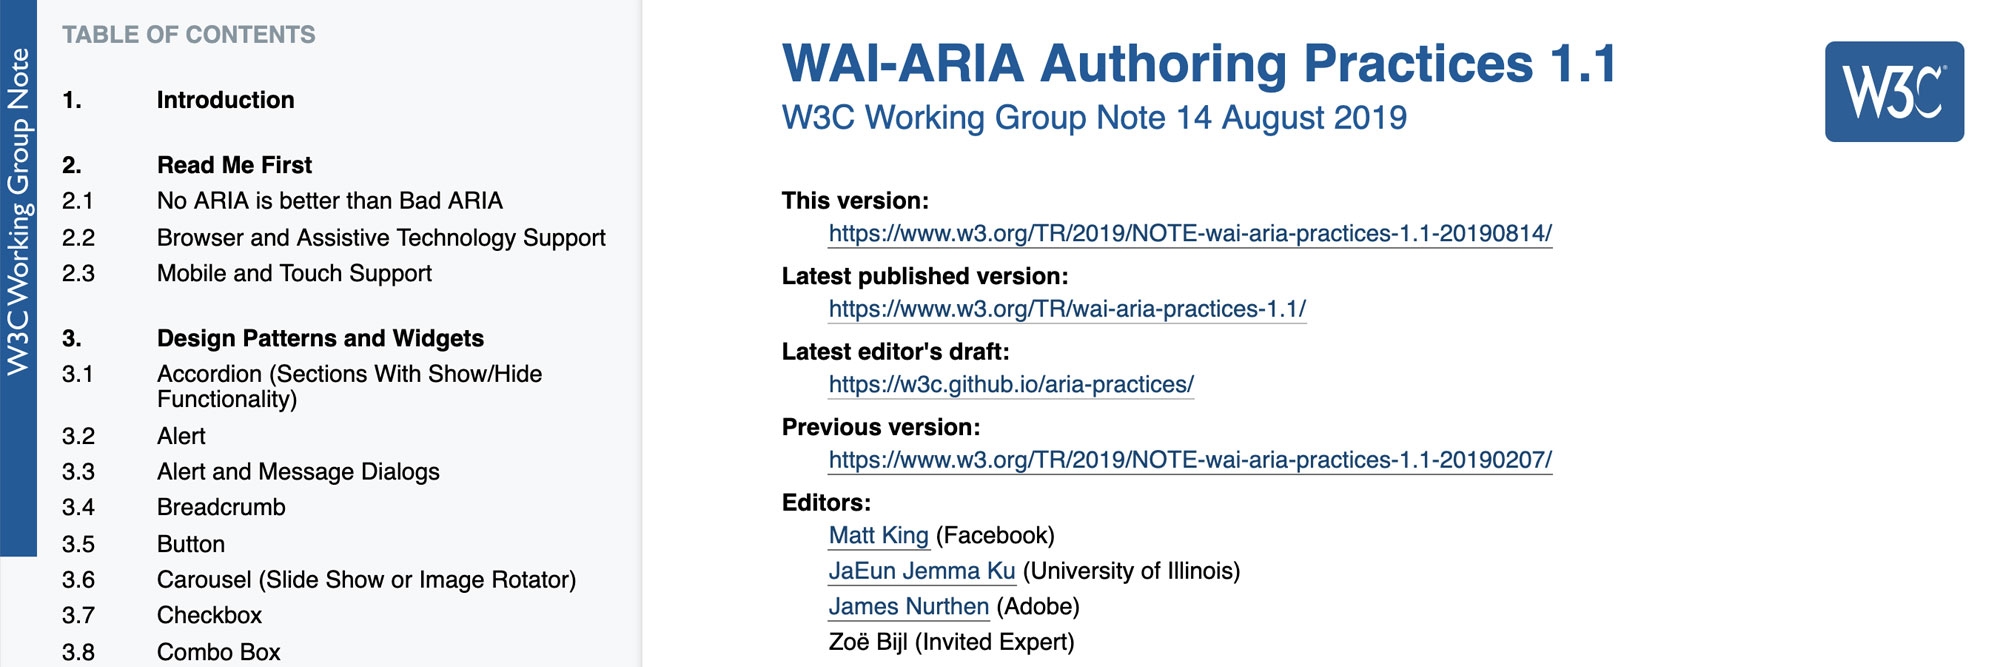 Screenshot of the WAI-ARIA Authoring Practices 1.1 Draft